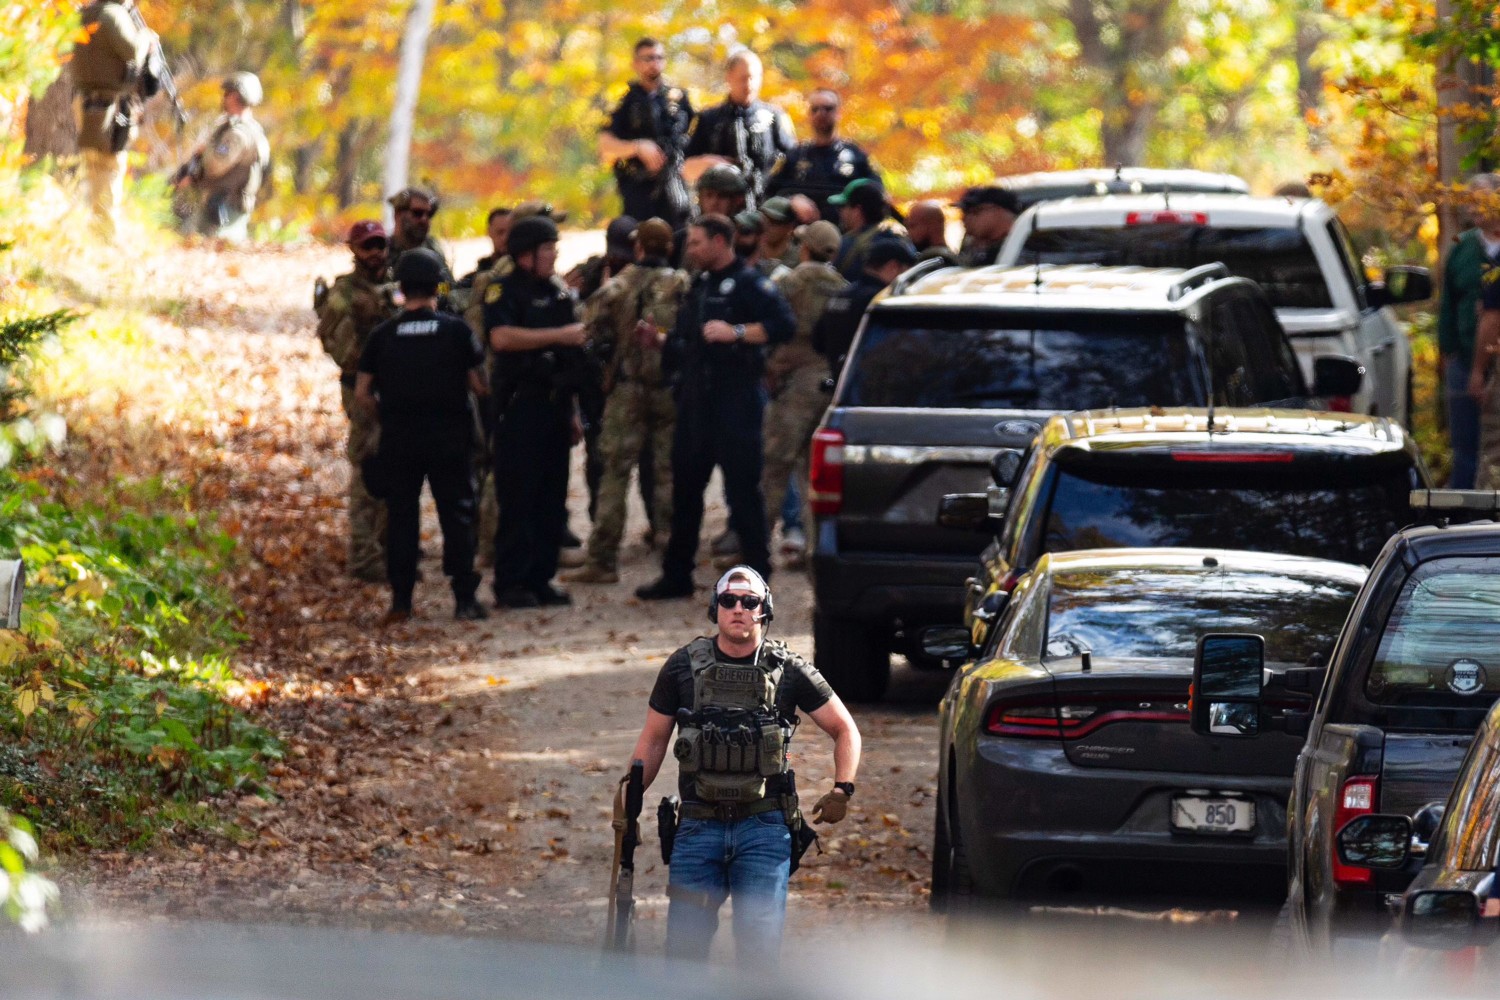 Police near a house thought to belong to suspect Robert Card’s sister in Durham, Maine, on Friday. ASHLEY L. CONTI FOR THE WALL STREET JOURNAL